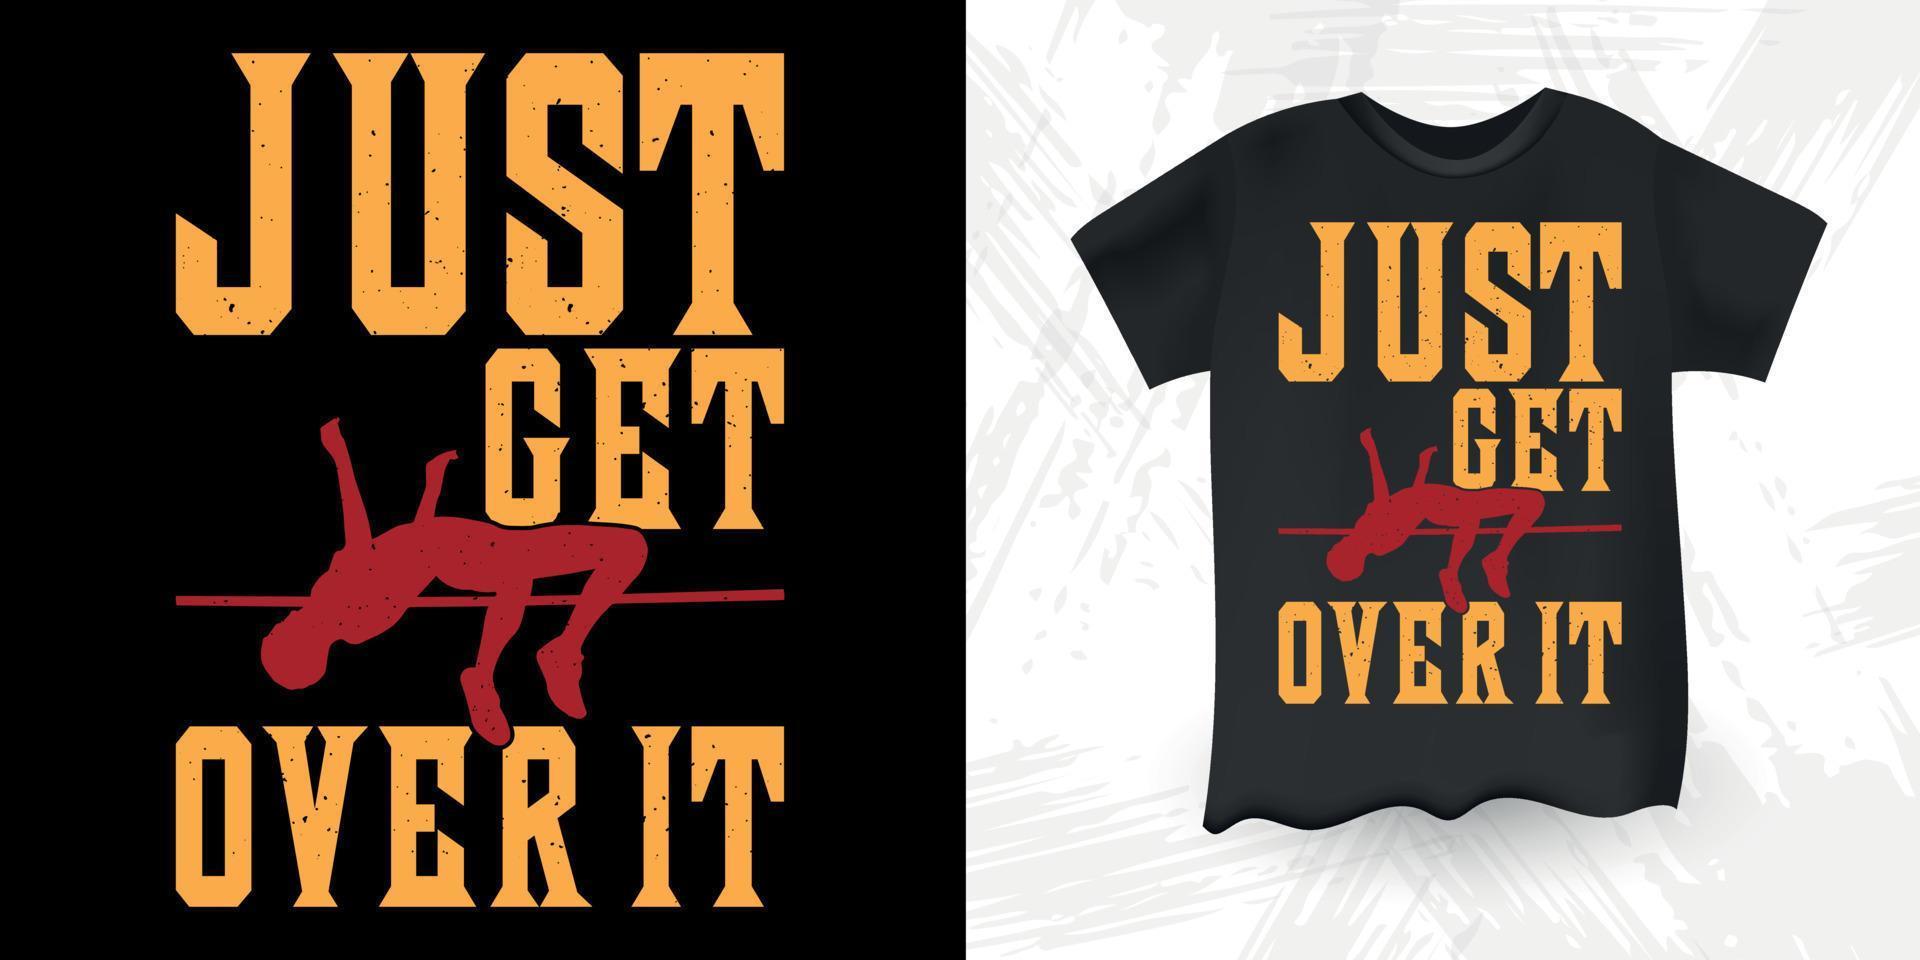 Just Get Over It Funny High Jump Retro Vintage High Jumping T-Shirt Design vector